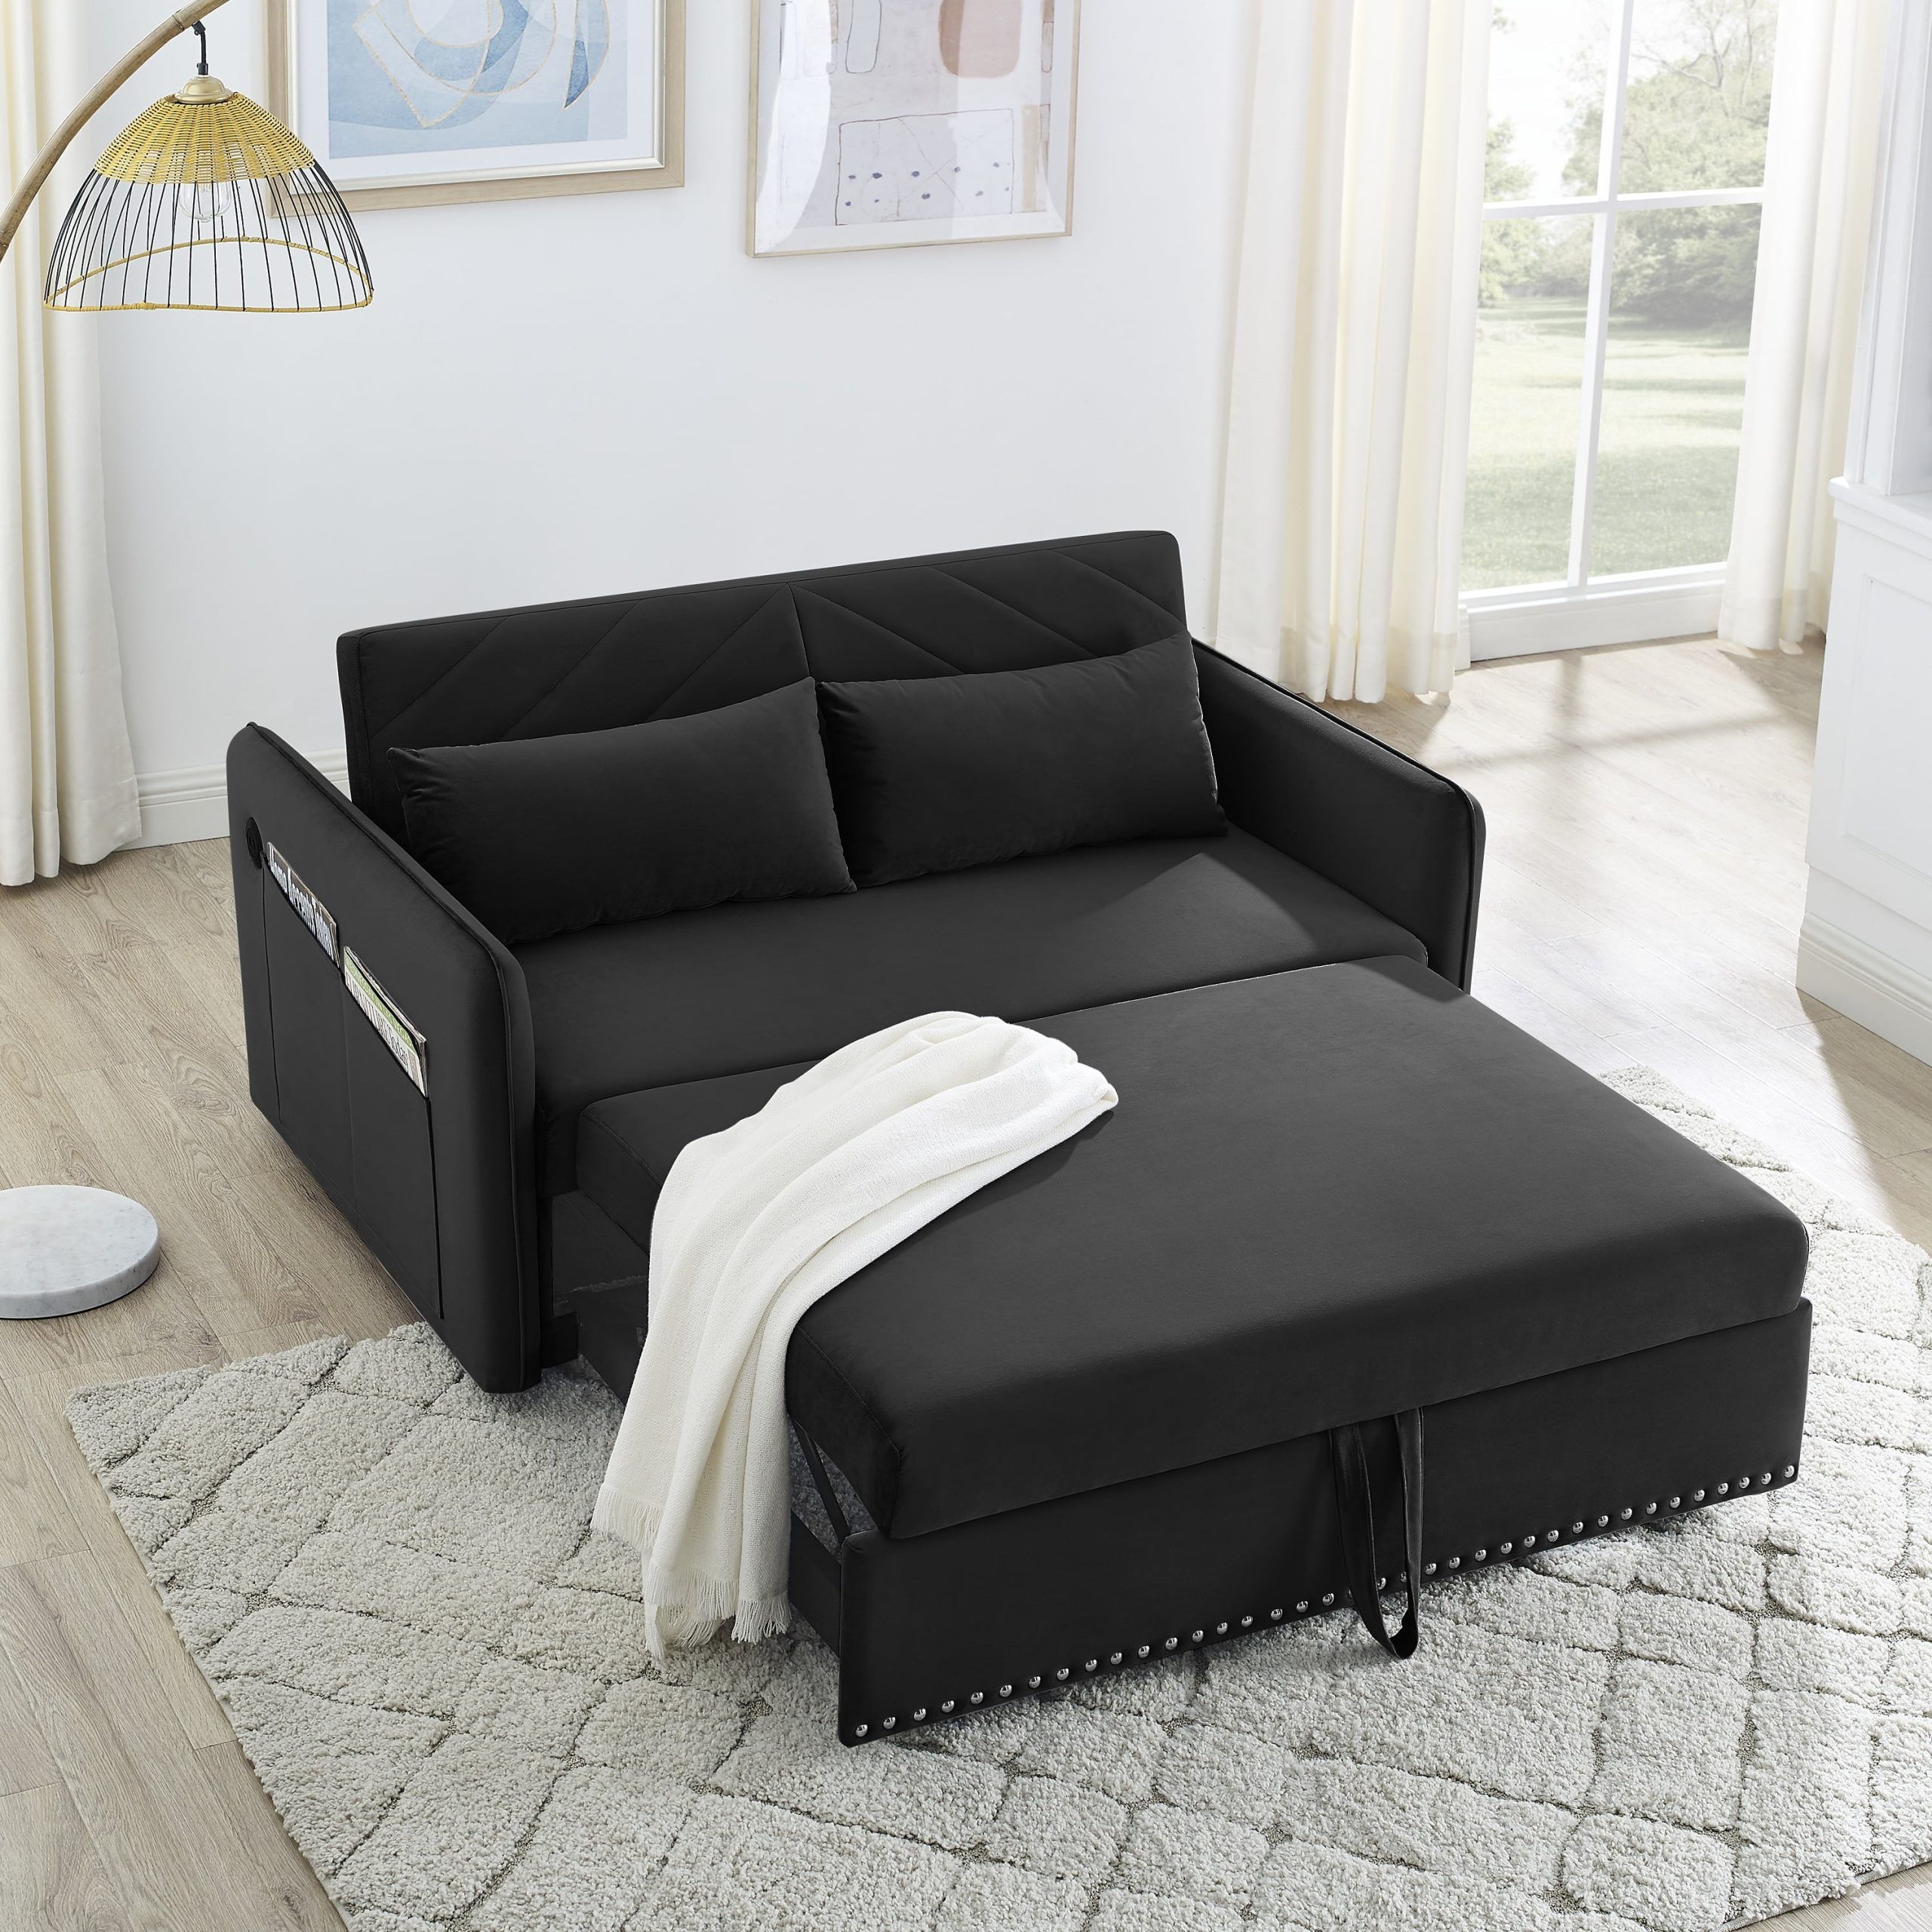 Momspeace 3 In 1 Sleeper Sofa Couch Bed With 2 Usb Ports, 55" Velvet  Convertible Loveseat With Pull Out Sofa Bed For Living Room – Black –  Walmart With Regard To 3 In 1 Gray Pull Out Sleeper Sofas (Photo 7 of 15)